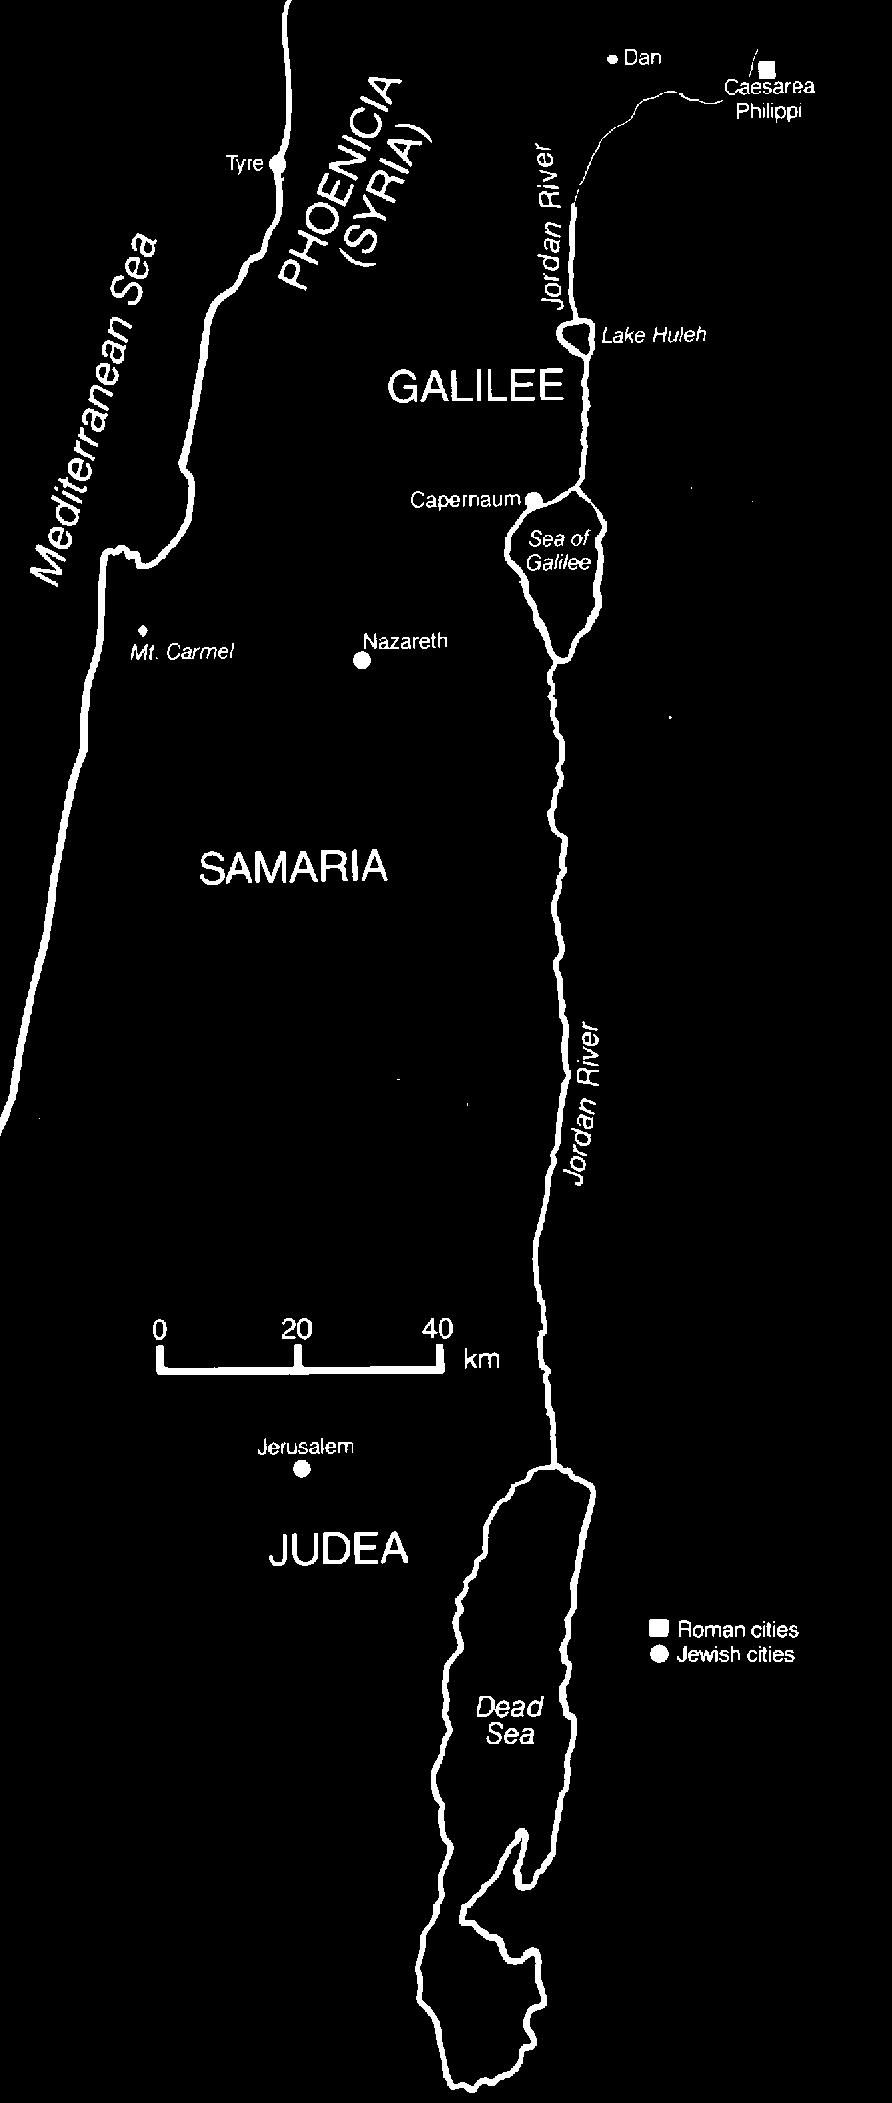 After David s son King Solomon, the united kingdom splits in two. Samaria becomes the capital of the northern kingdom; Jerusalem, the capital of the south.